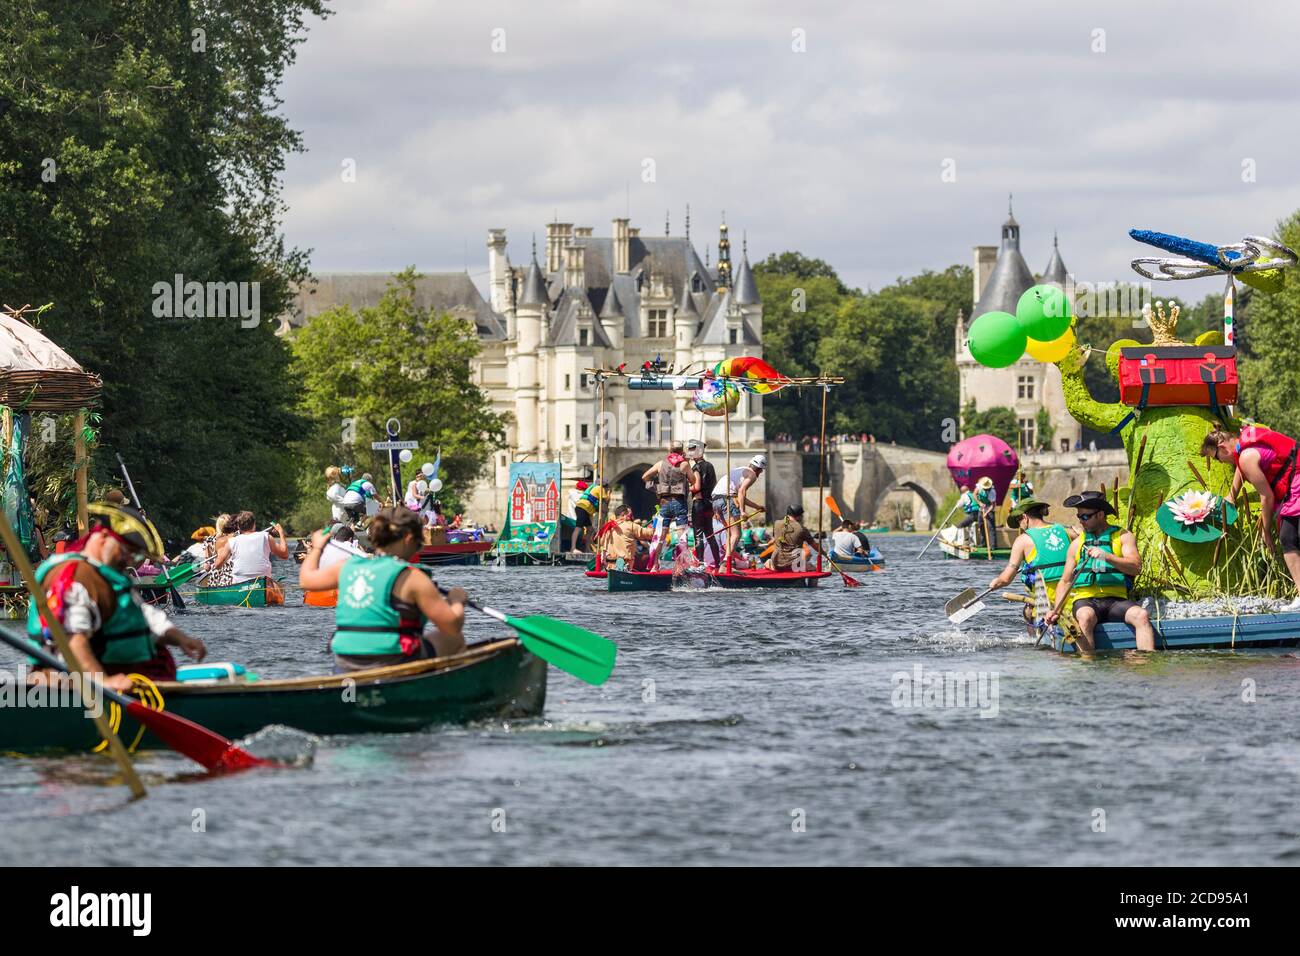 France, Indre et Loire, Cher valley, Jour de Cher, Chenonceaux, river parade, popular event imagined by the Blere - Val de Cher community of communes to highlight the Cher valley and its river heritage Stock Photo